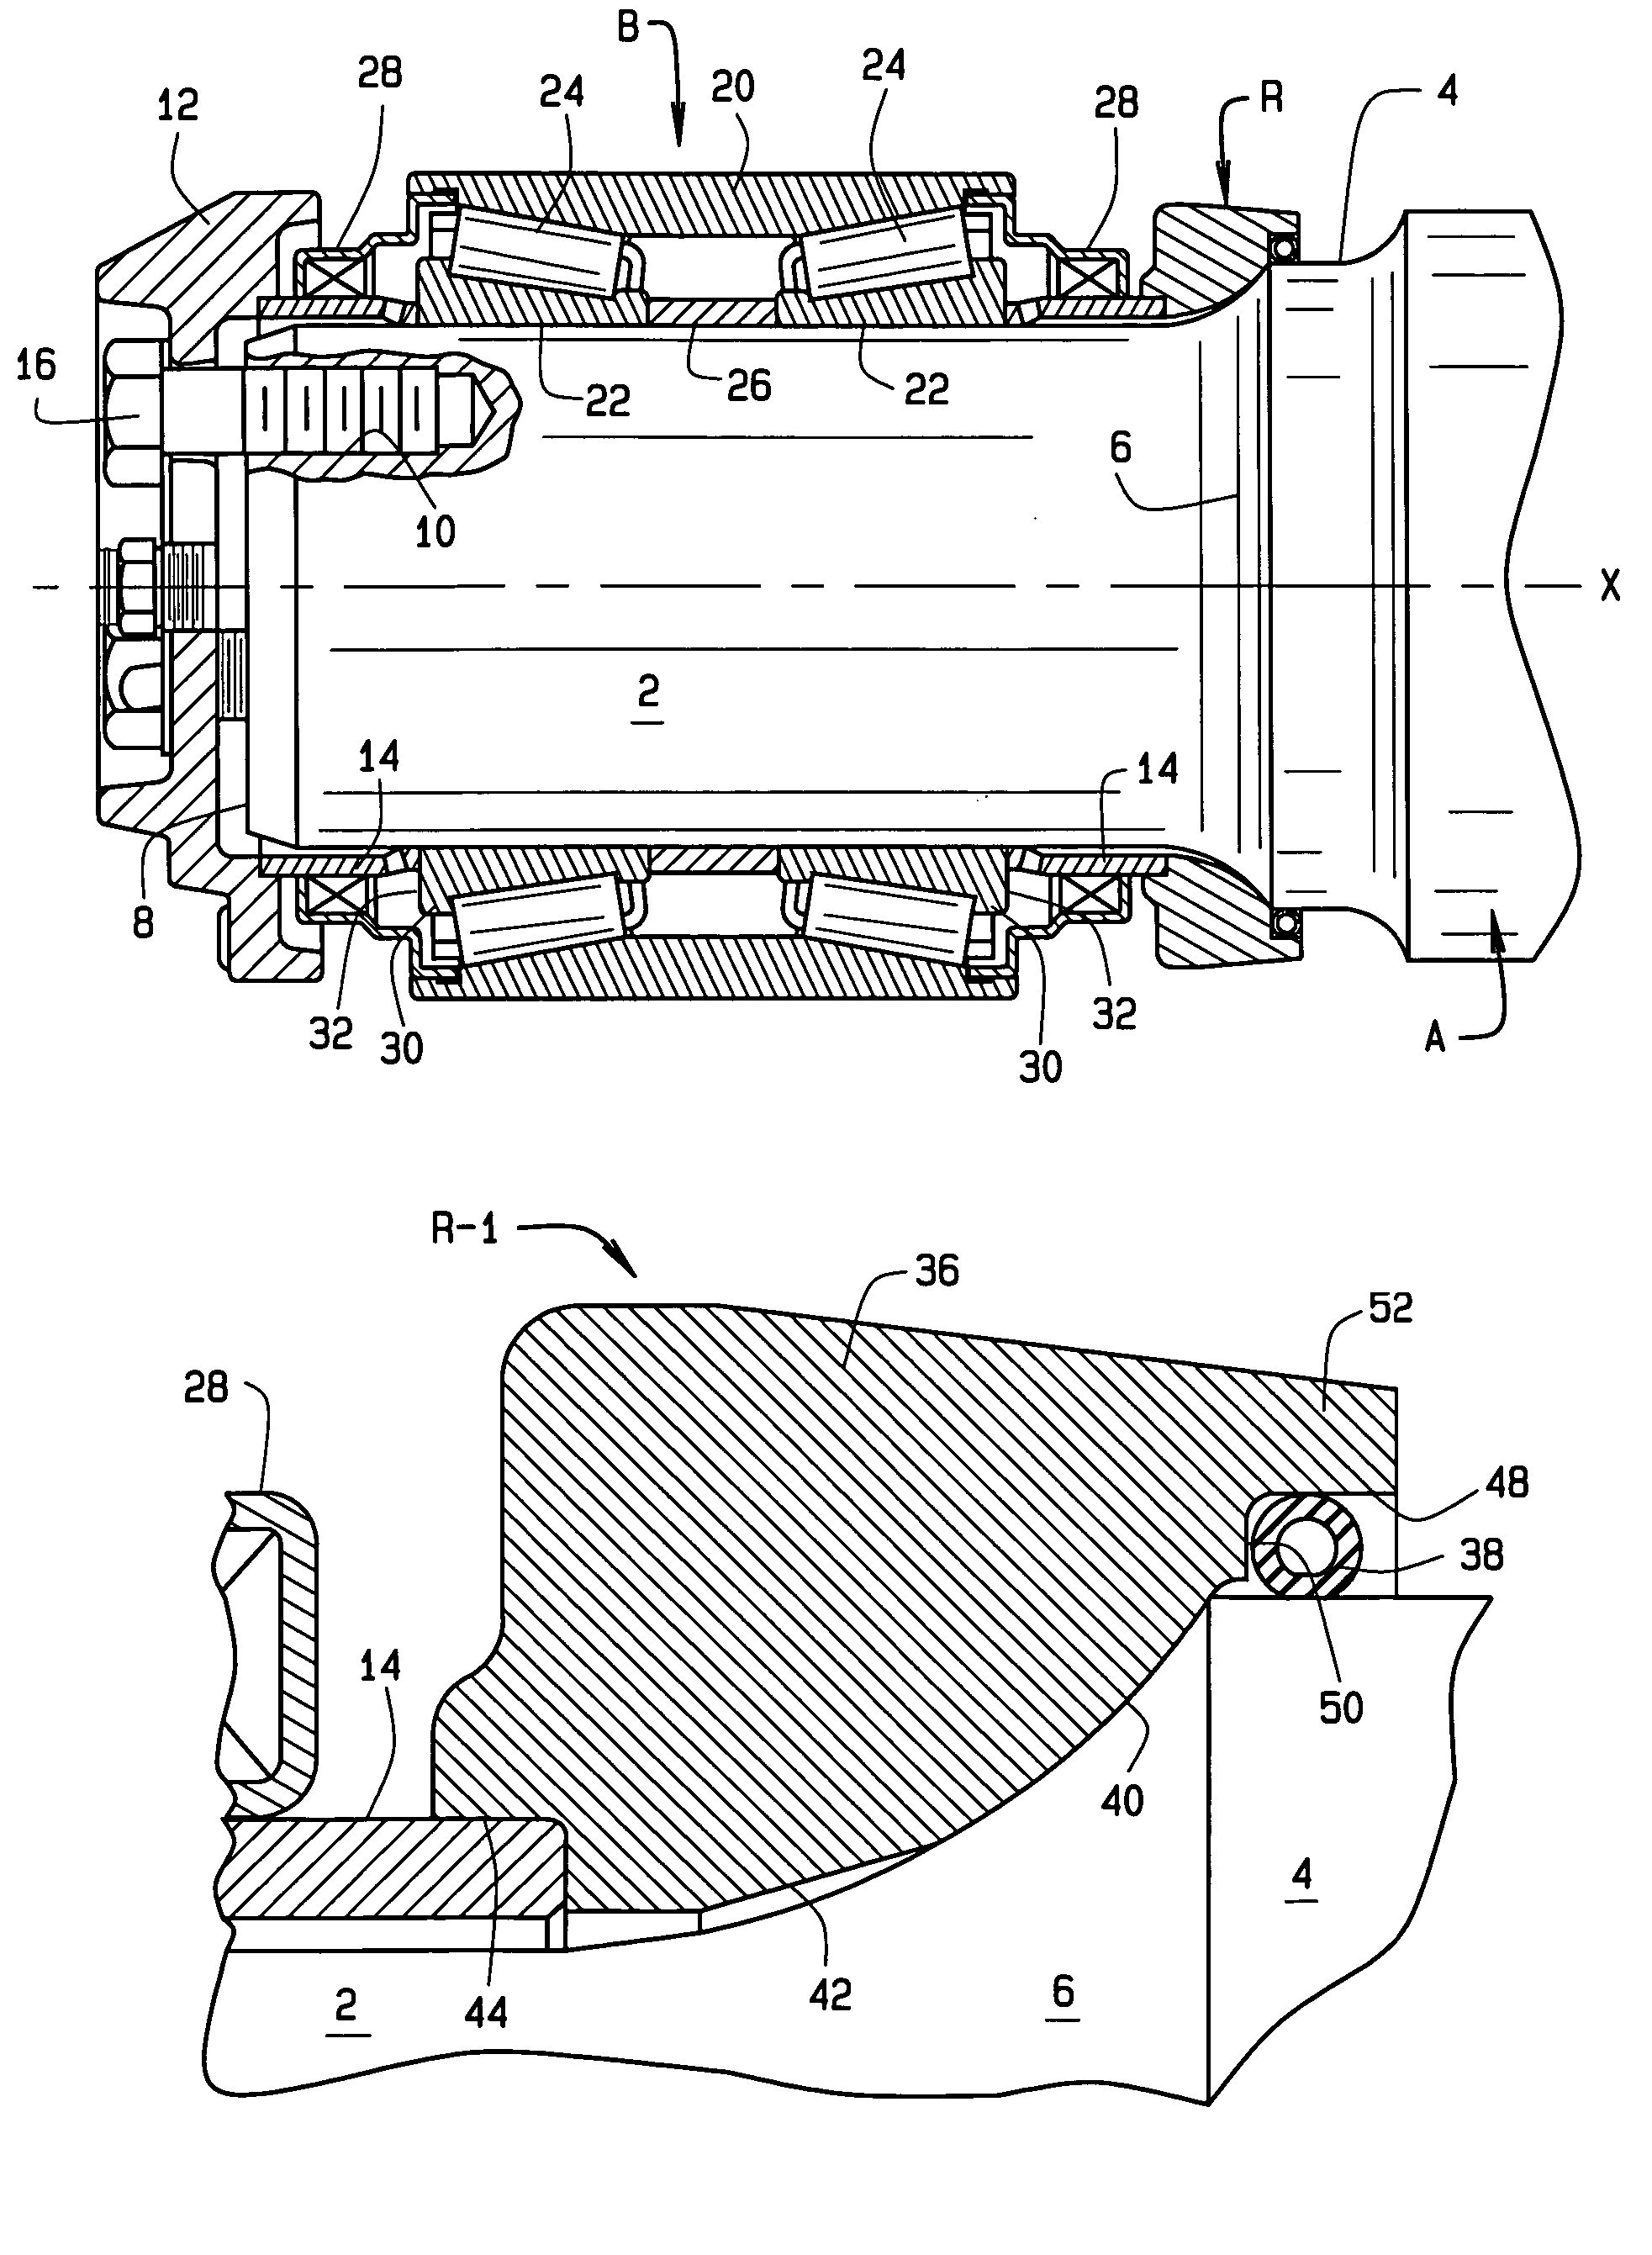 Backing ring for railcar axle